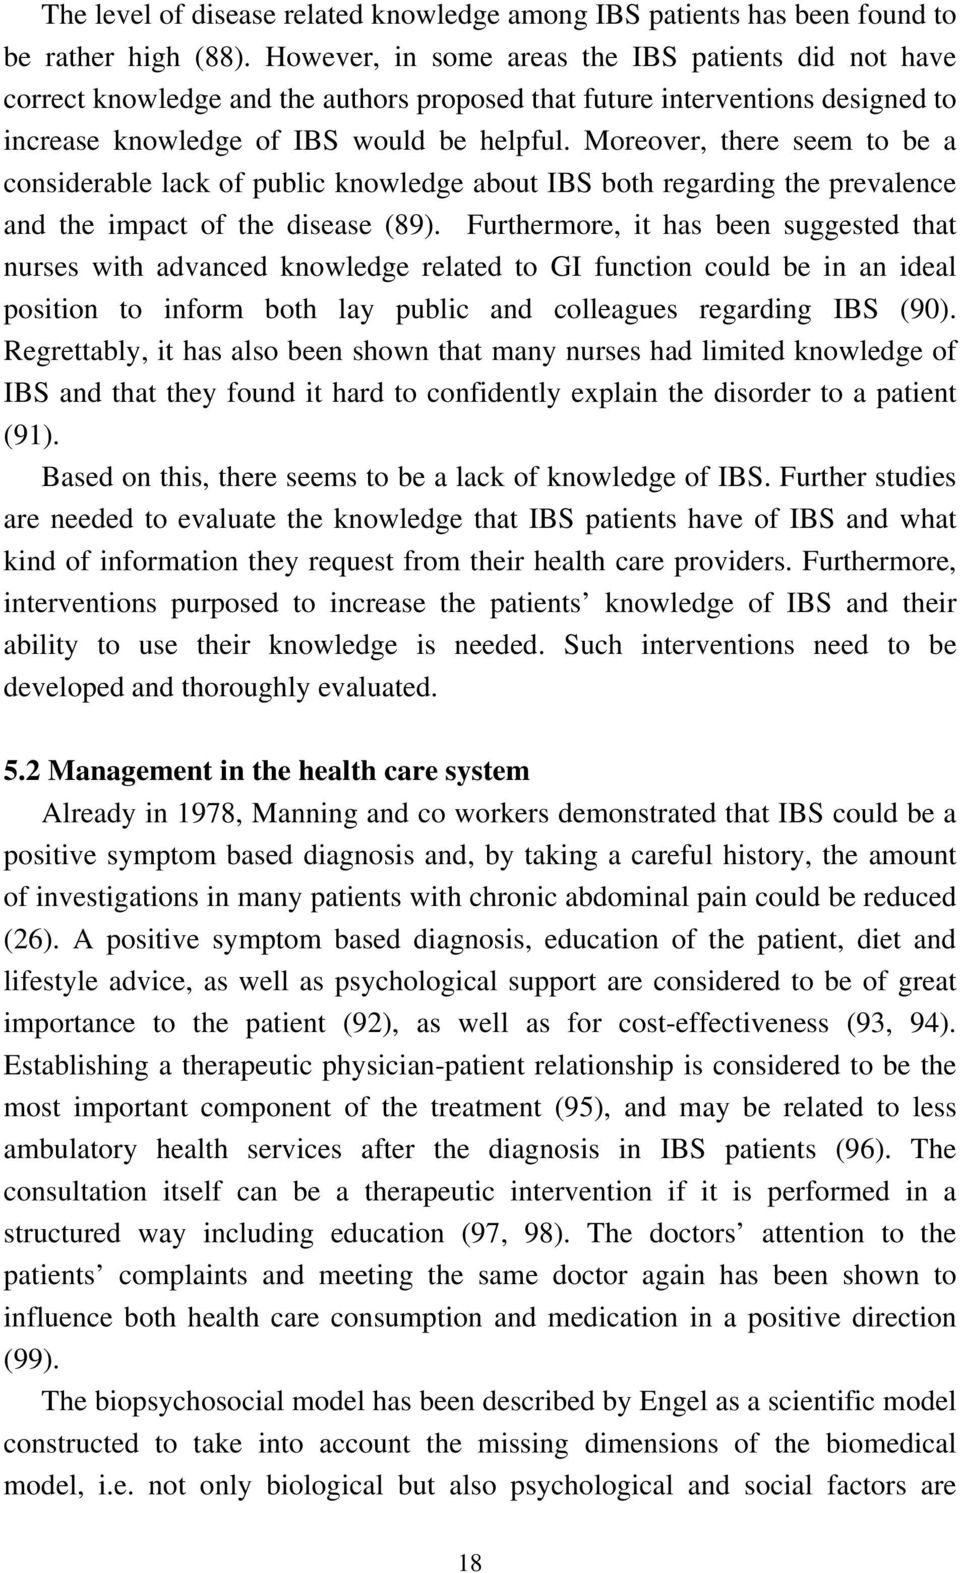 Moreover, there seem to be a considerable lack of public knowledge about IBS both regarding the prevalence and the impact of the disease (89).